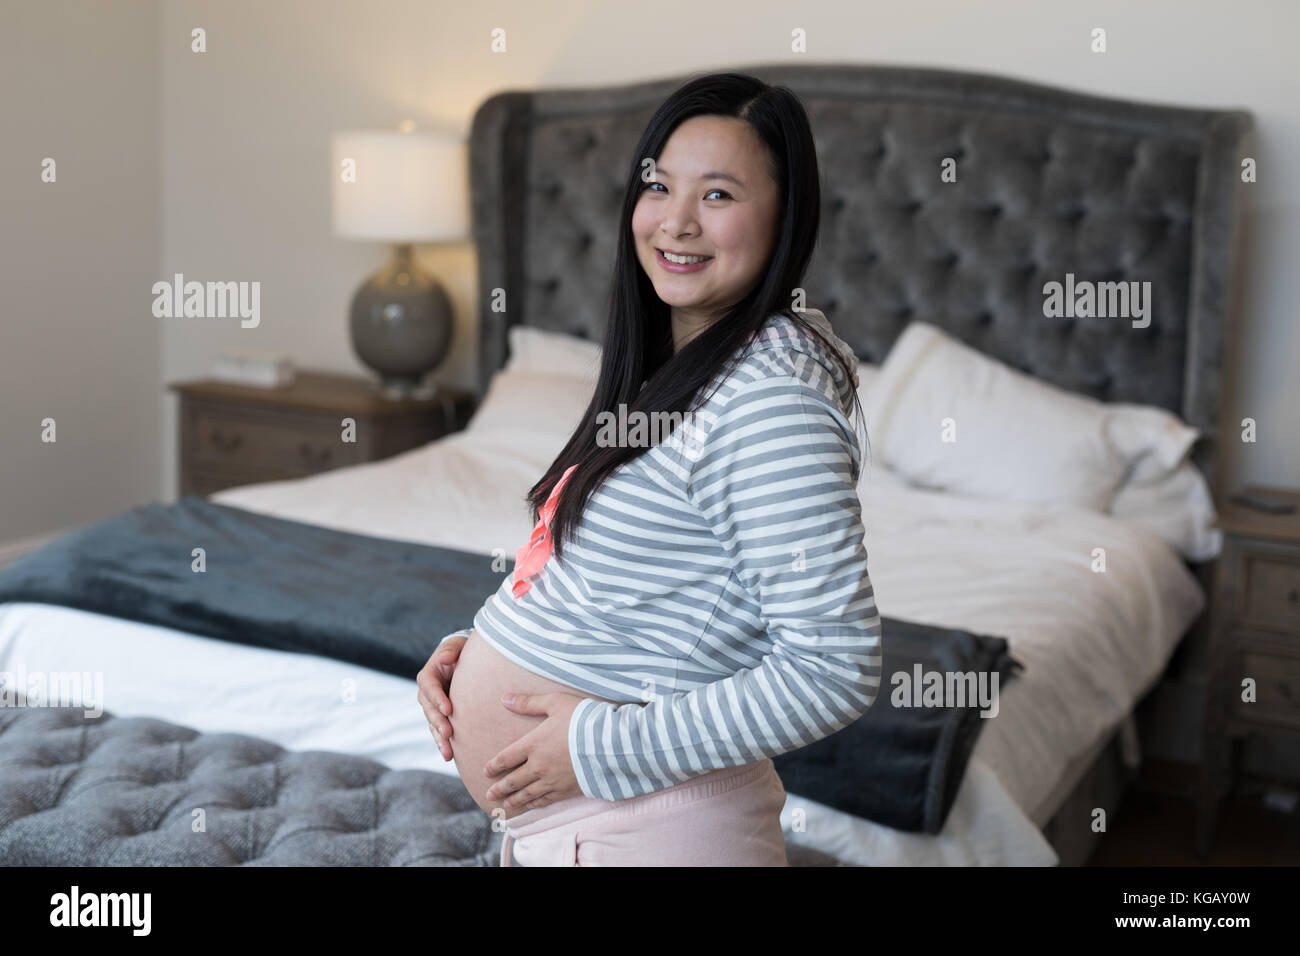 Portrait of pregnant woman touching her stomach in bedroom Stock Photo